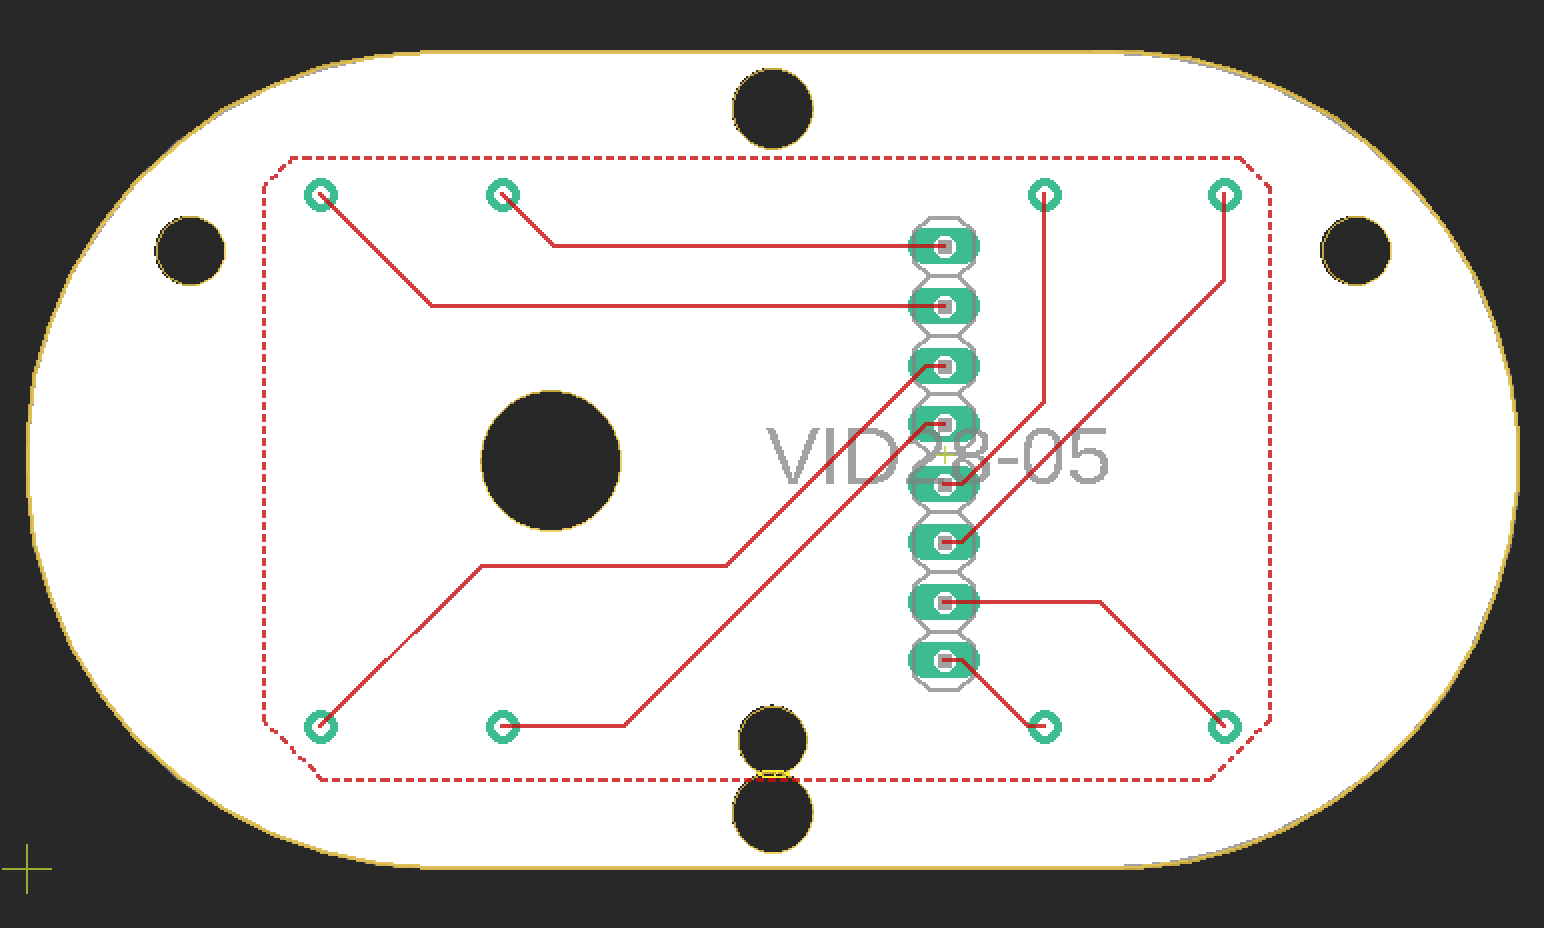 Figure 1. Layout of a VID28-05 circuit board made in Eagle